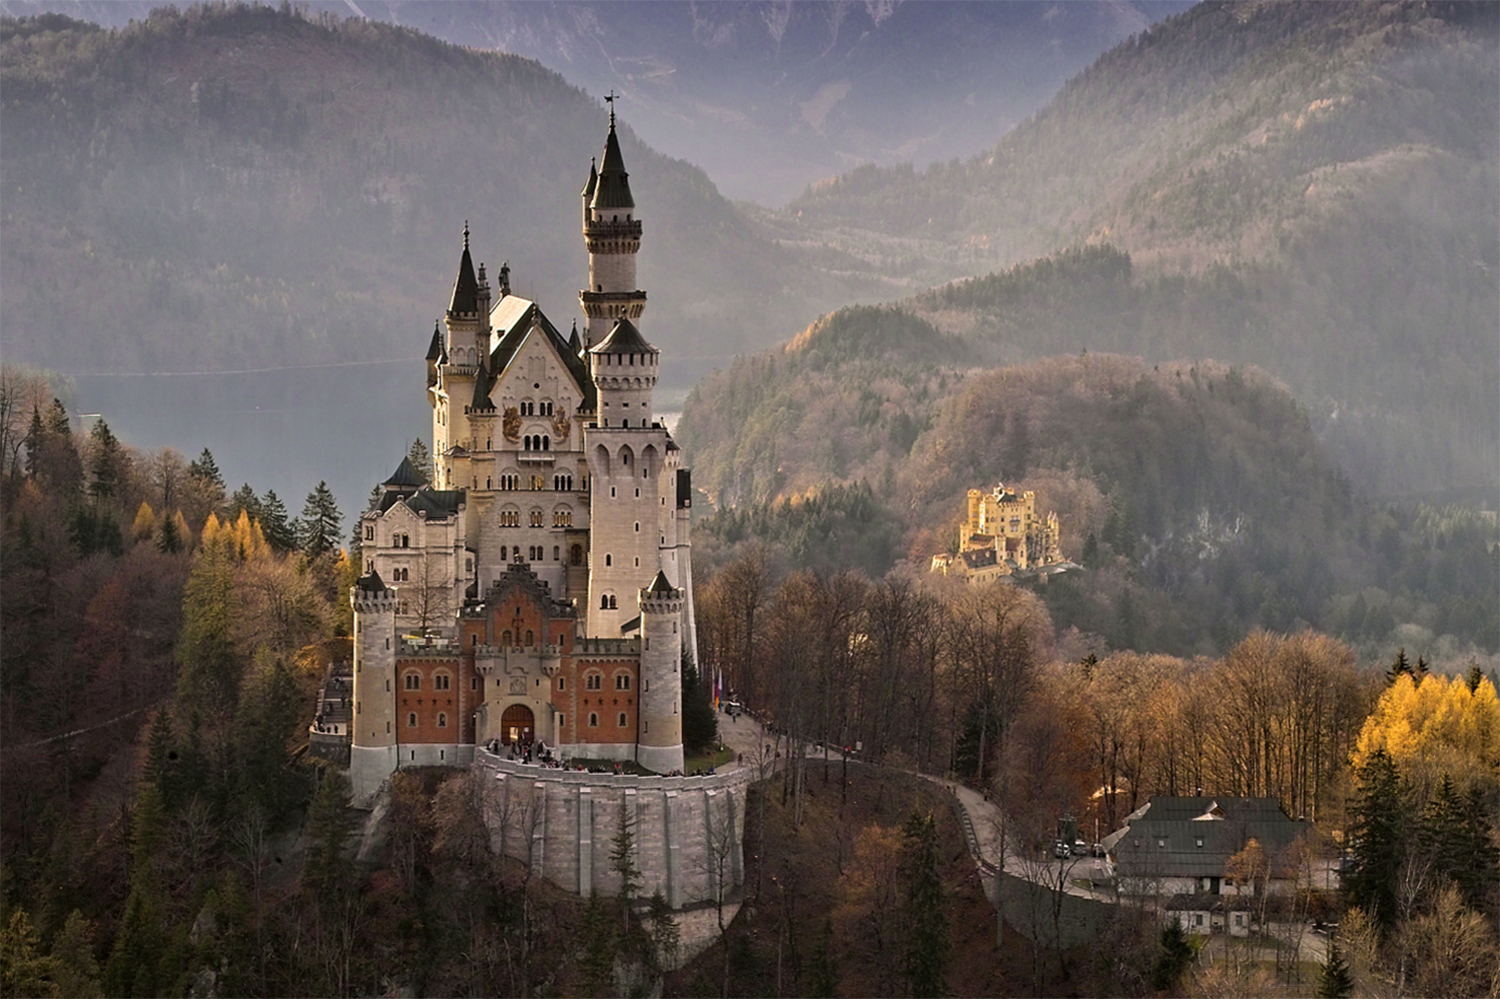 Neuschwanstein Castle in Germany. Image courtesy of Canva